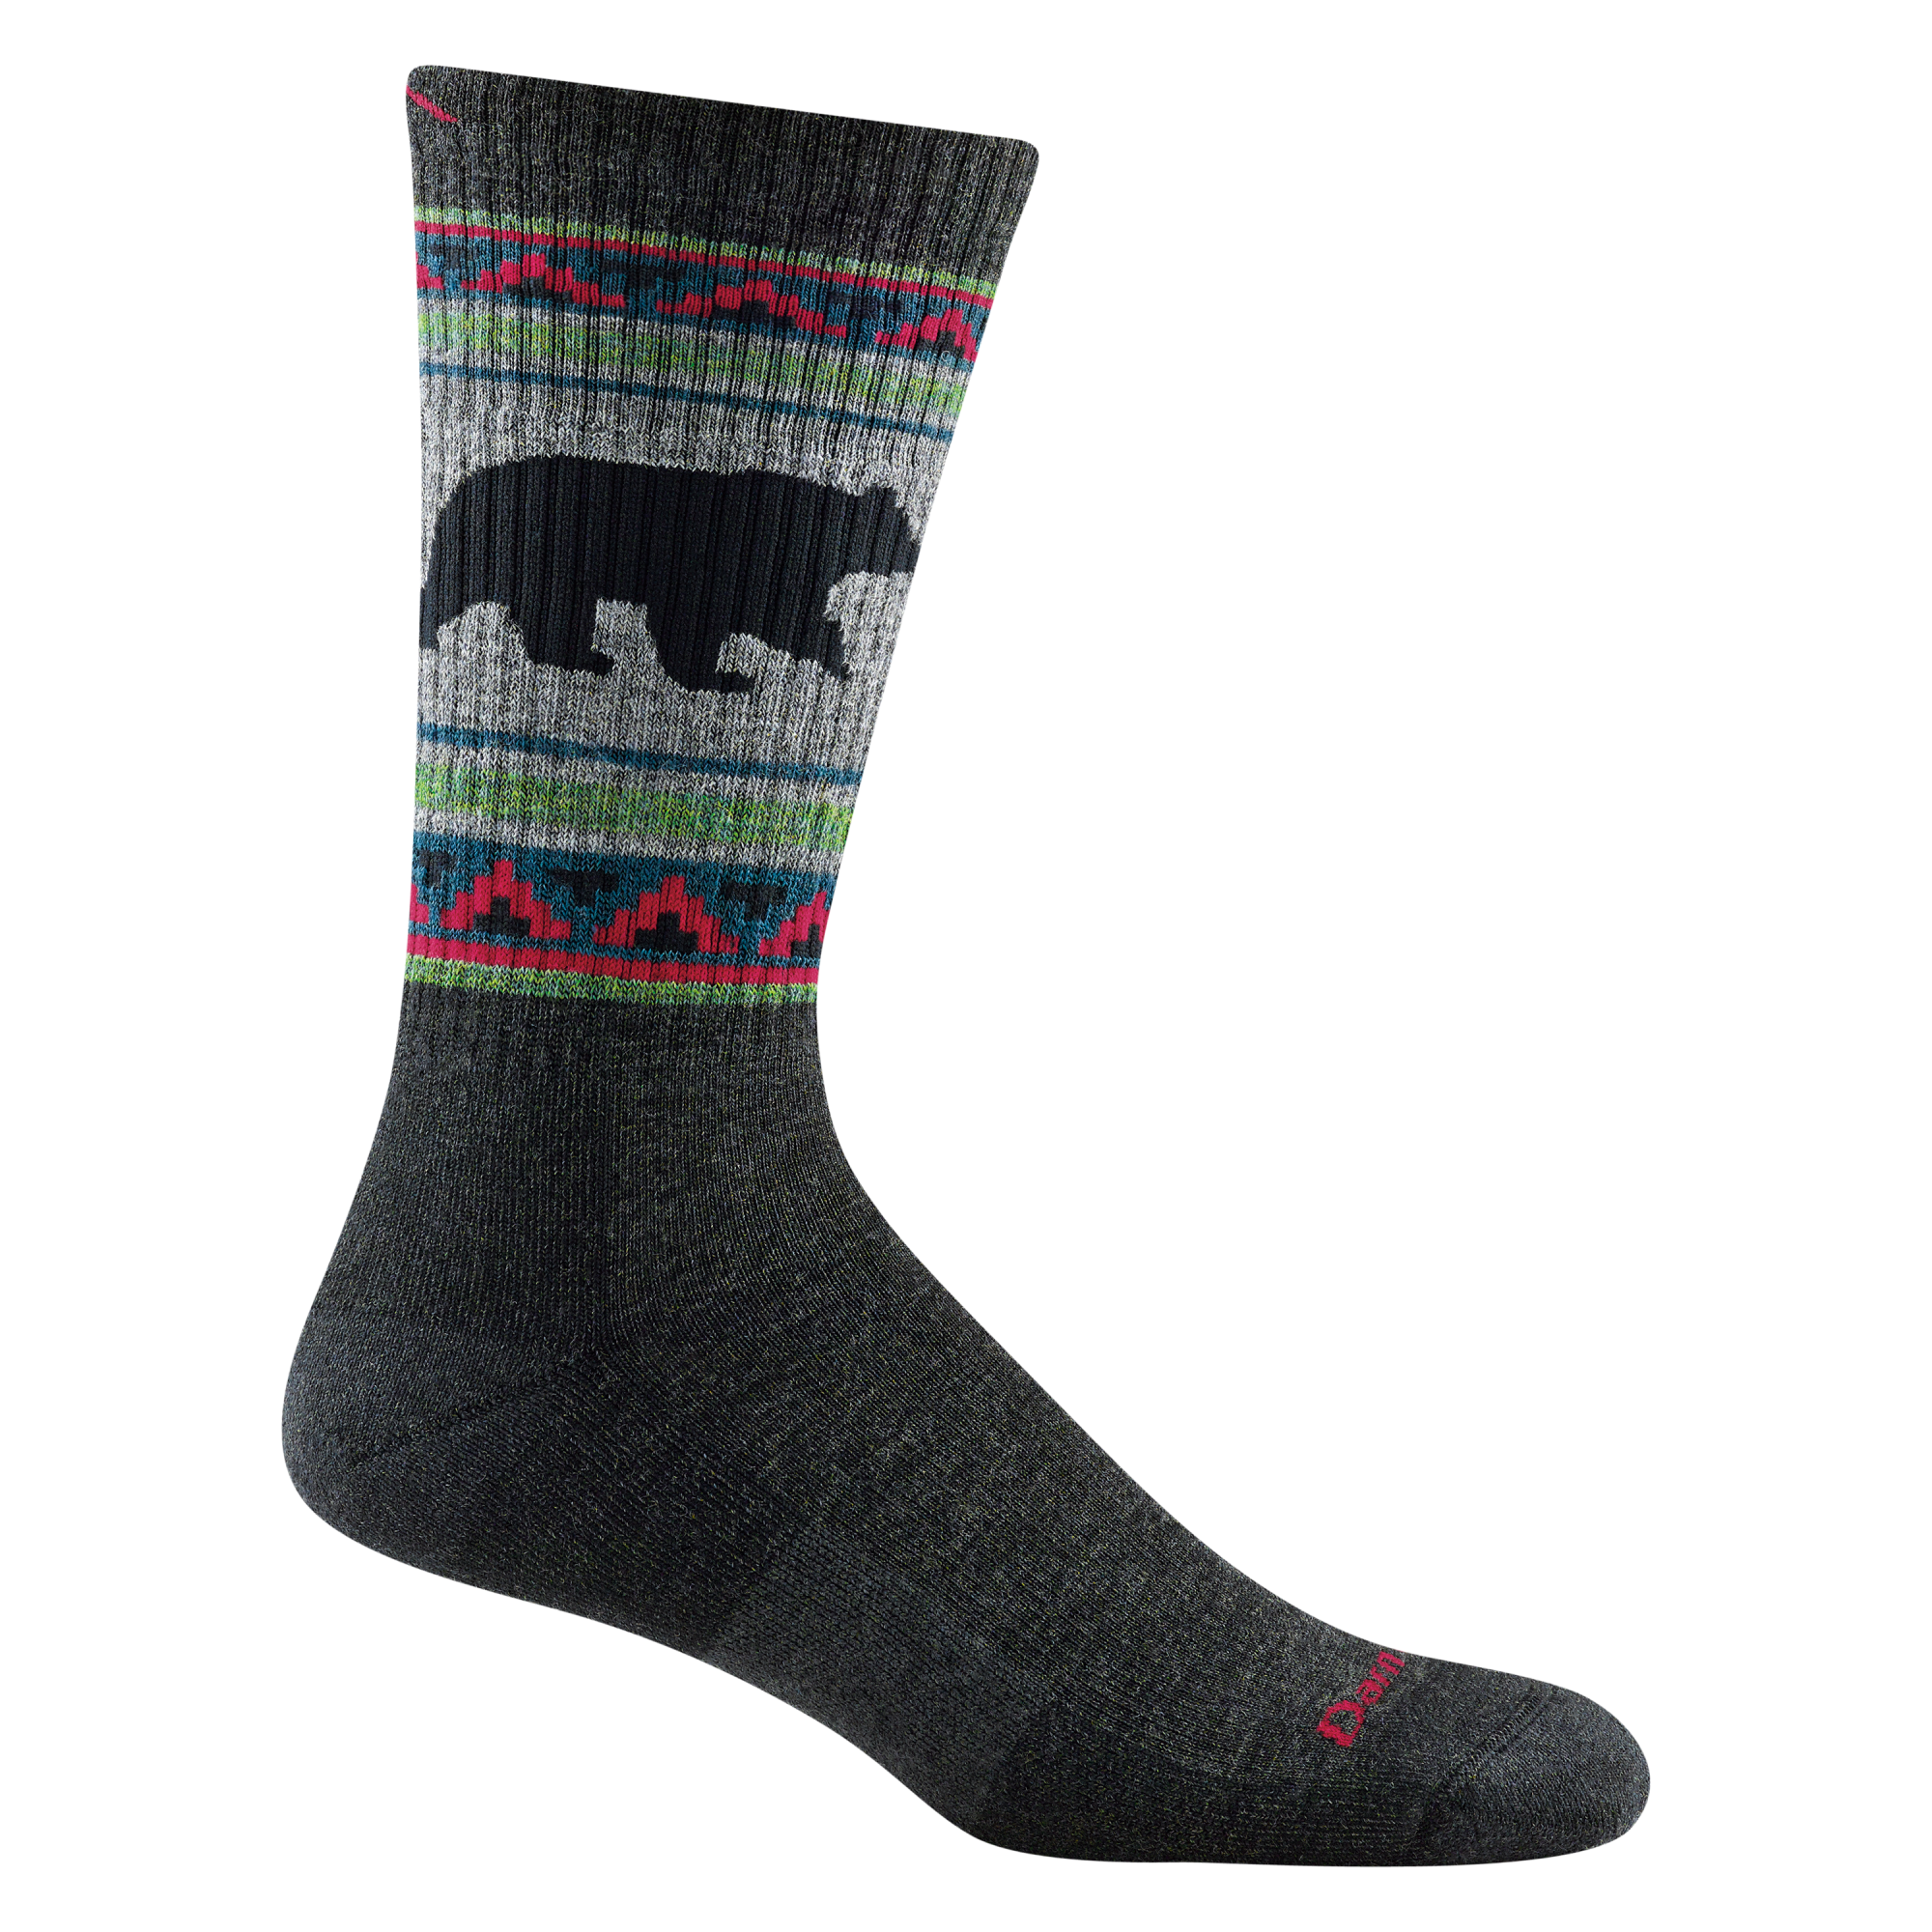 1980 men's vangrizzle boot hiking sock in color charcoal with green/blue/red striping around calf and black bear design